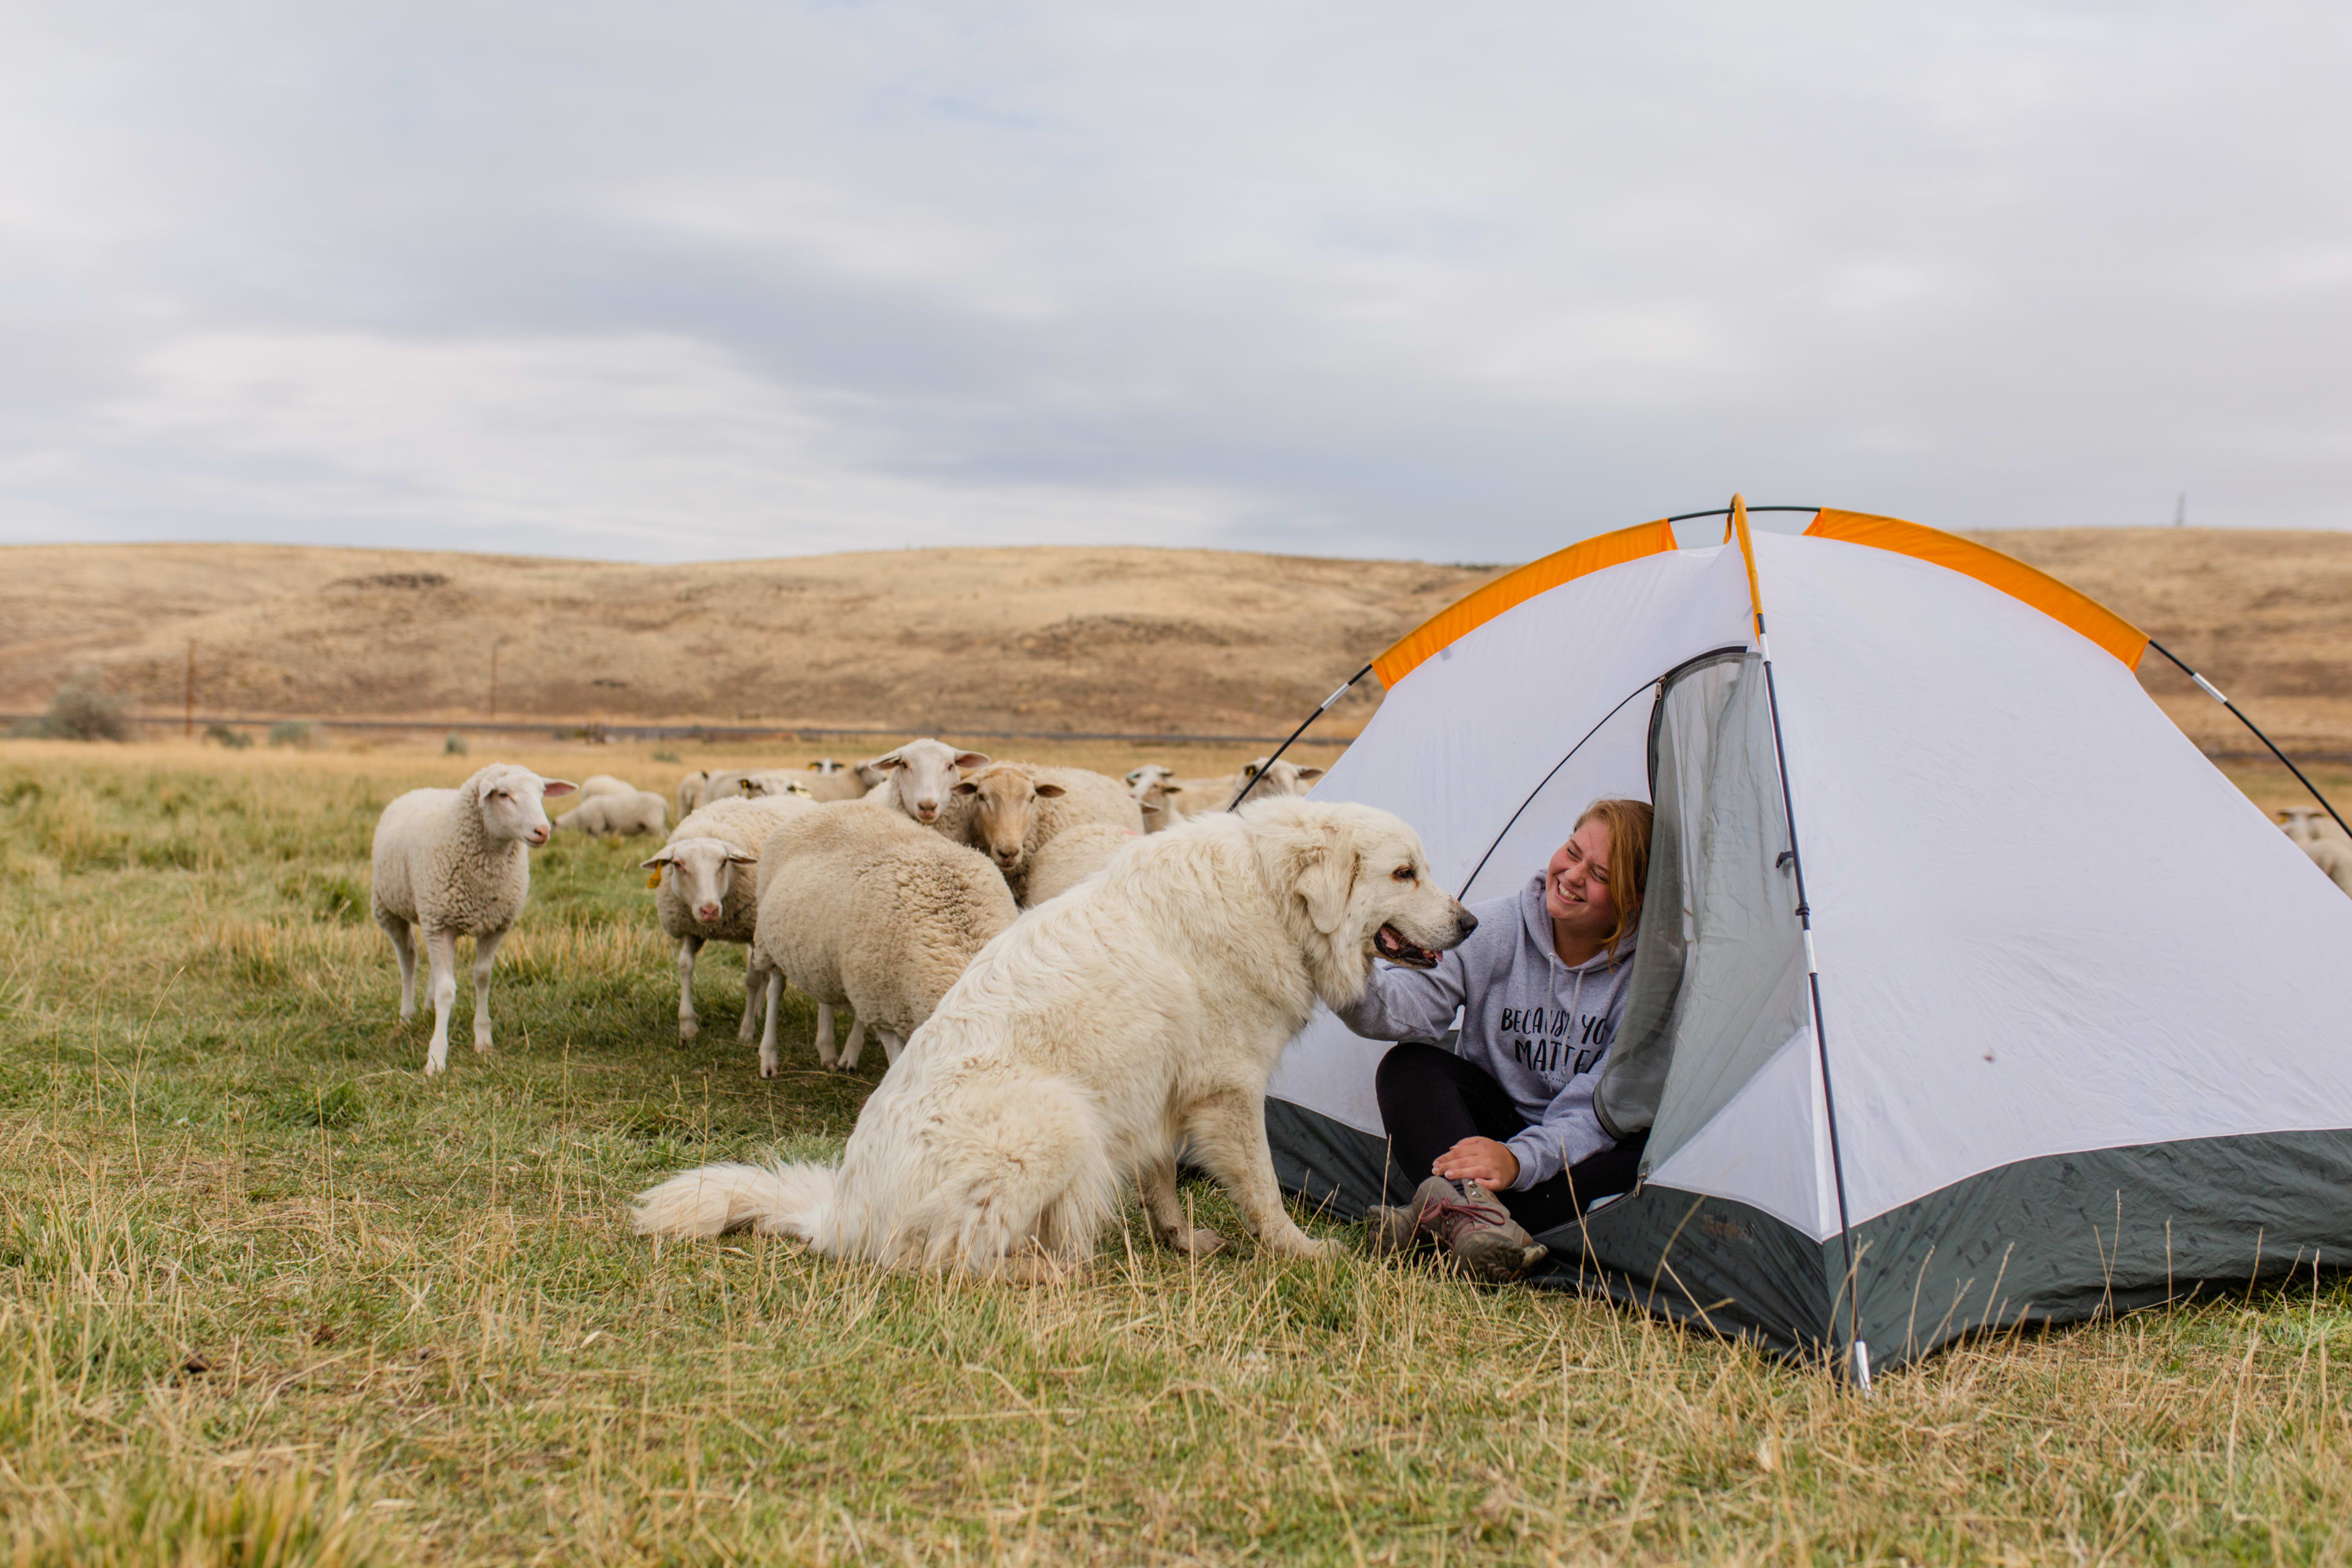 Enjoy the company of Lora, the daytime guard dog, and sheep if you camp in the pasture!